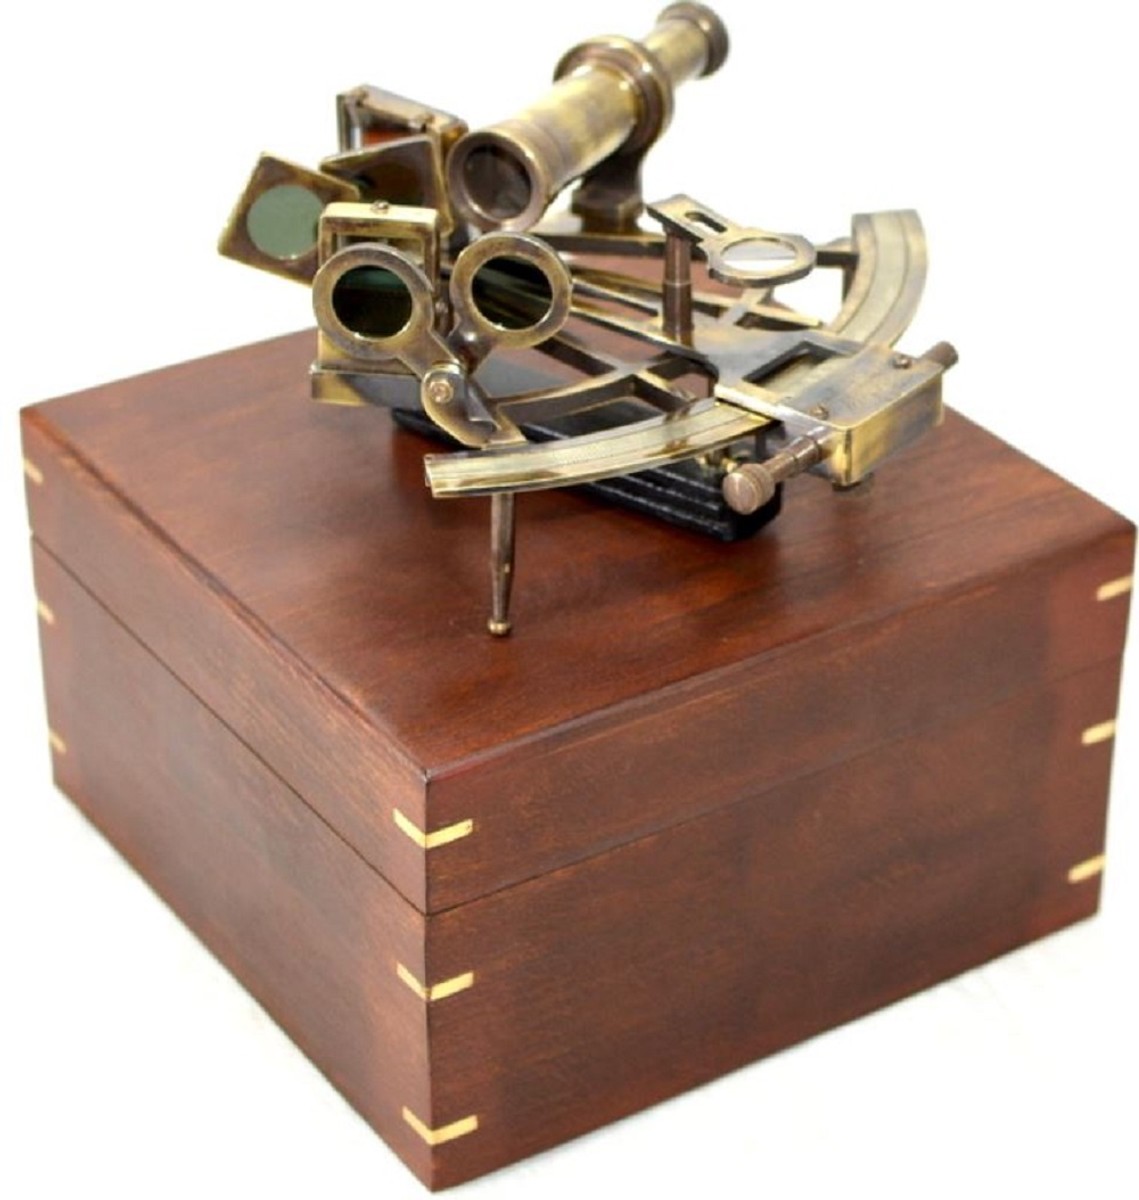 Casa Padrino luxury brass sextant with wooden box 19 x 21.5 x H. 10 cm -  Seafarers' protractor - Nautical measuring instrument - Seafarers'  decorative accessories - Luxury decorative accessories